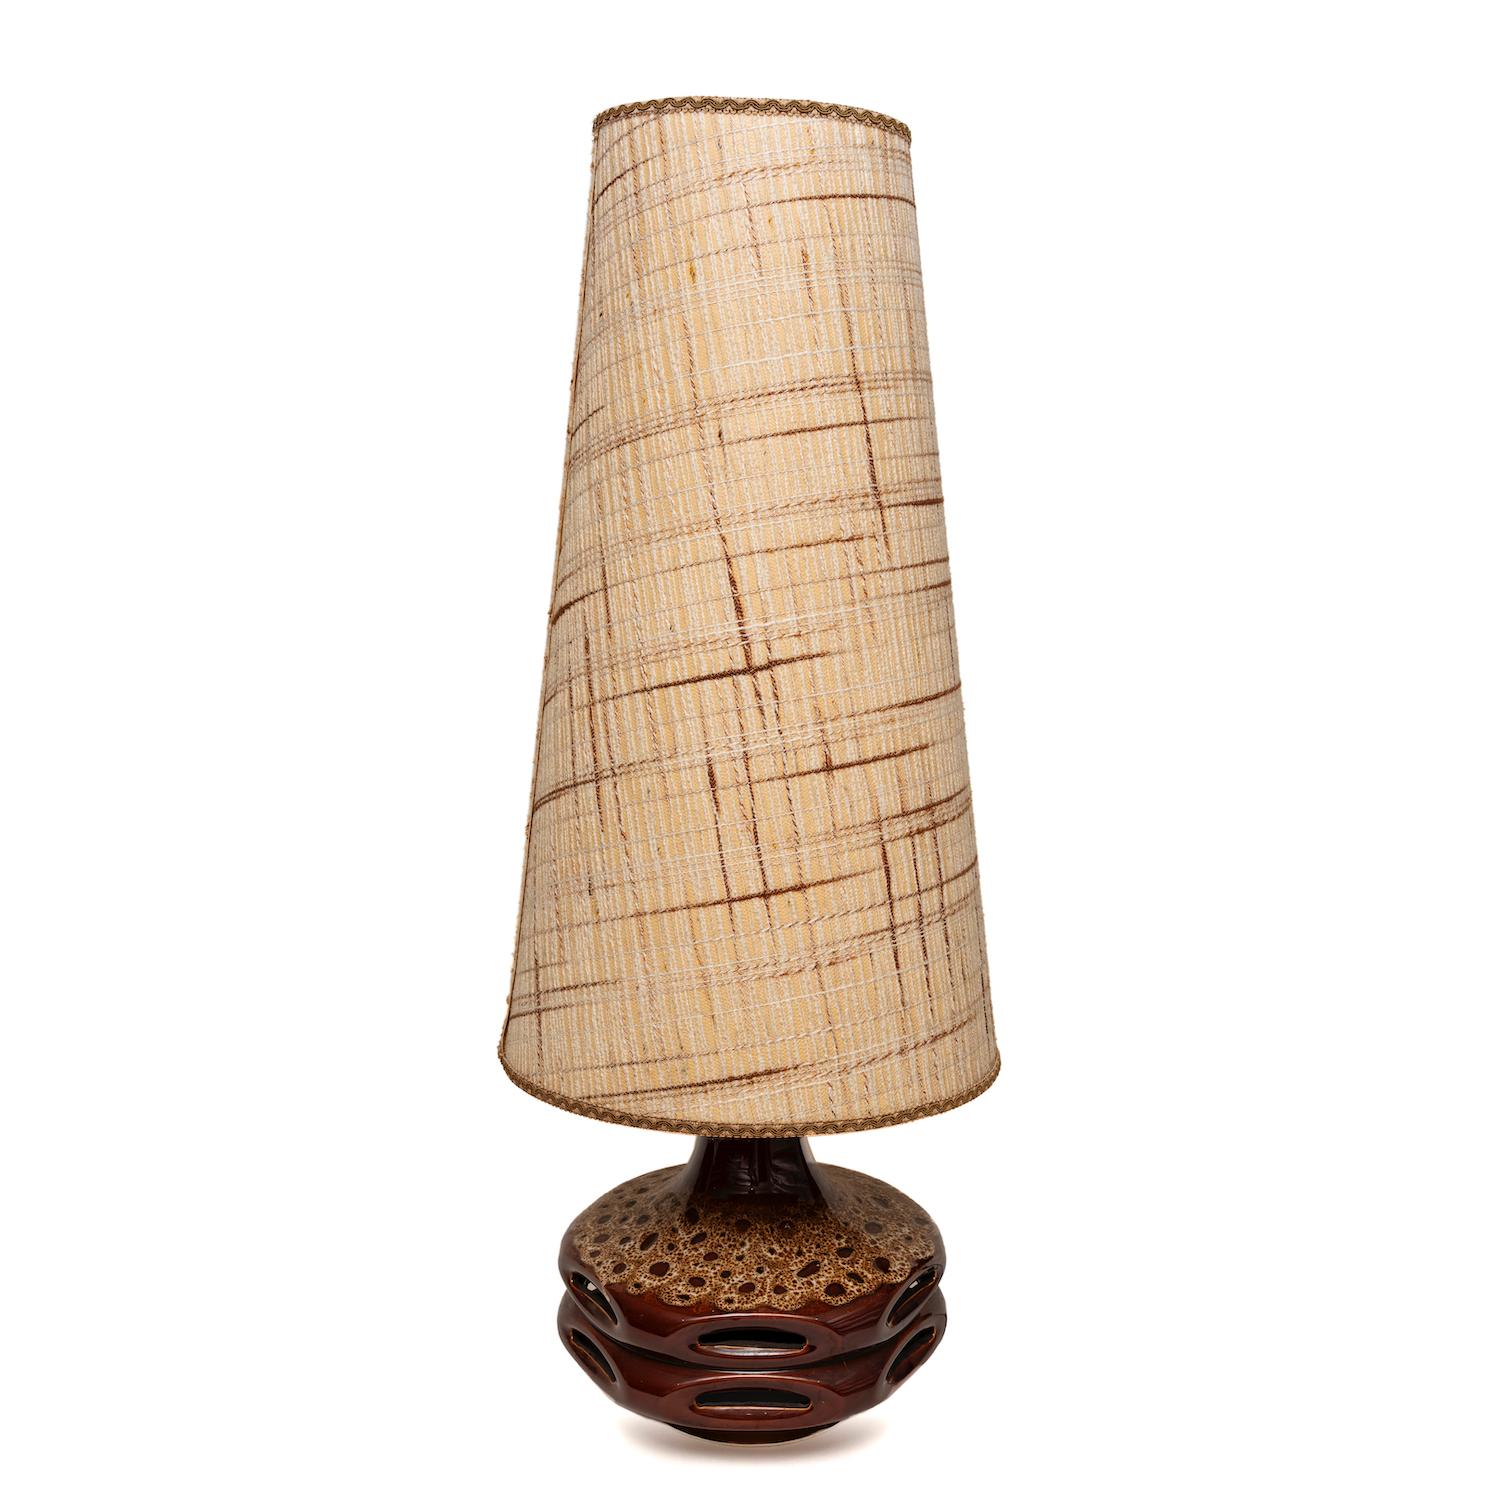 LArge, West German, Mid-Century Modern, brown & white, pierced & patterned, ceramic, hexagonal lava table lamp with original shade 93cm, 36½ inches high

Striking statement piece with the hexagonal form and the banded patterning and